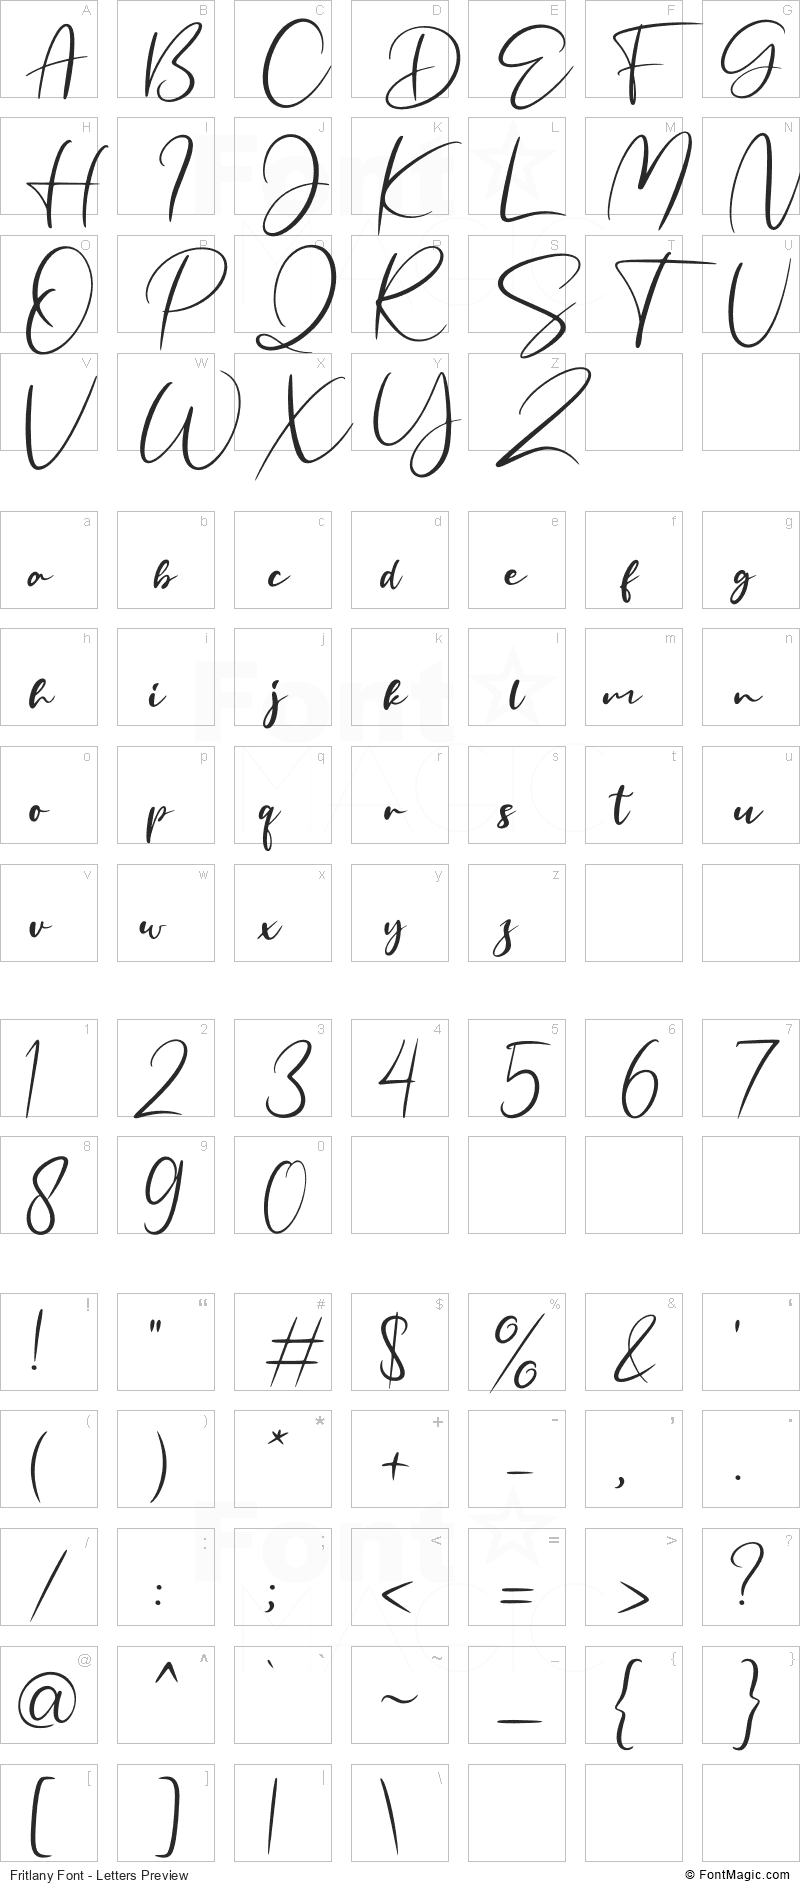 Fritlany Font - All Latters Preview Chart